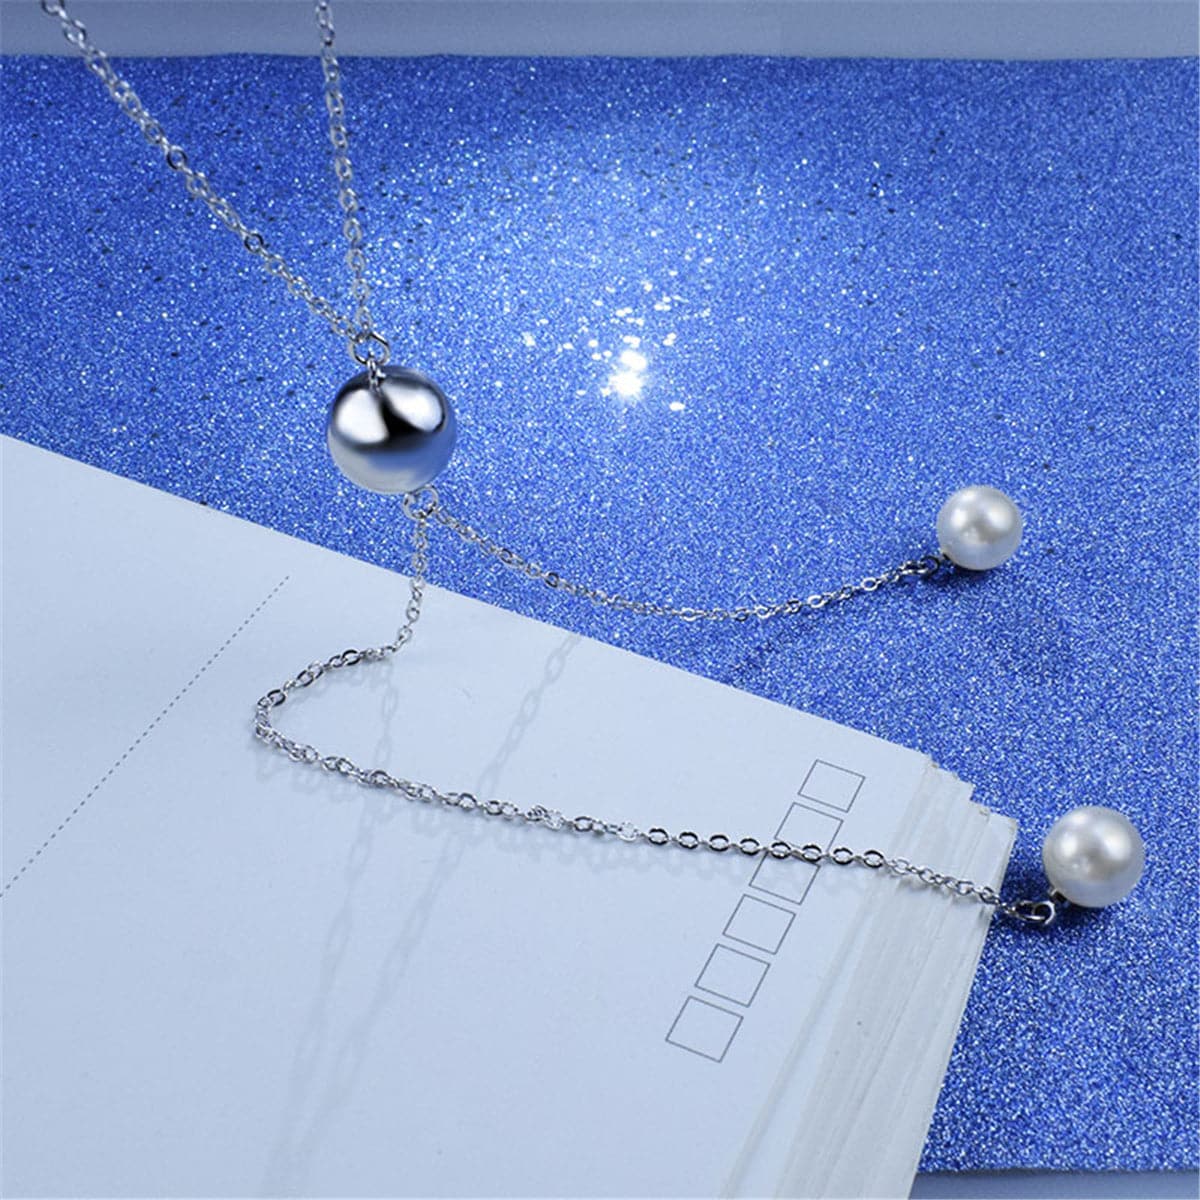 Double Pearl & Silver-Plated Pendant Necklace